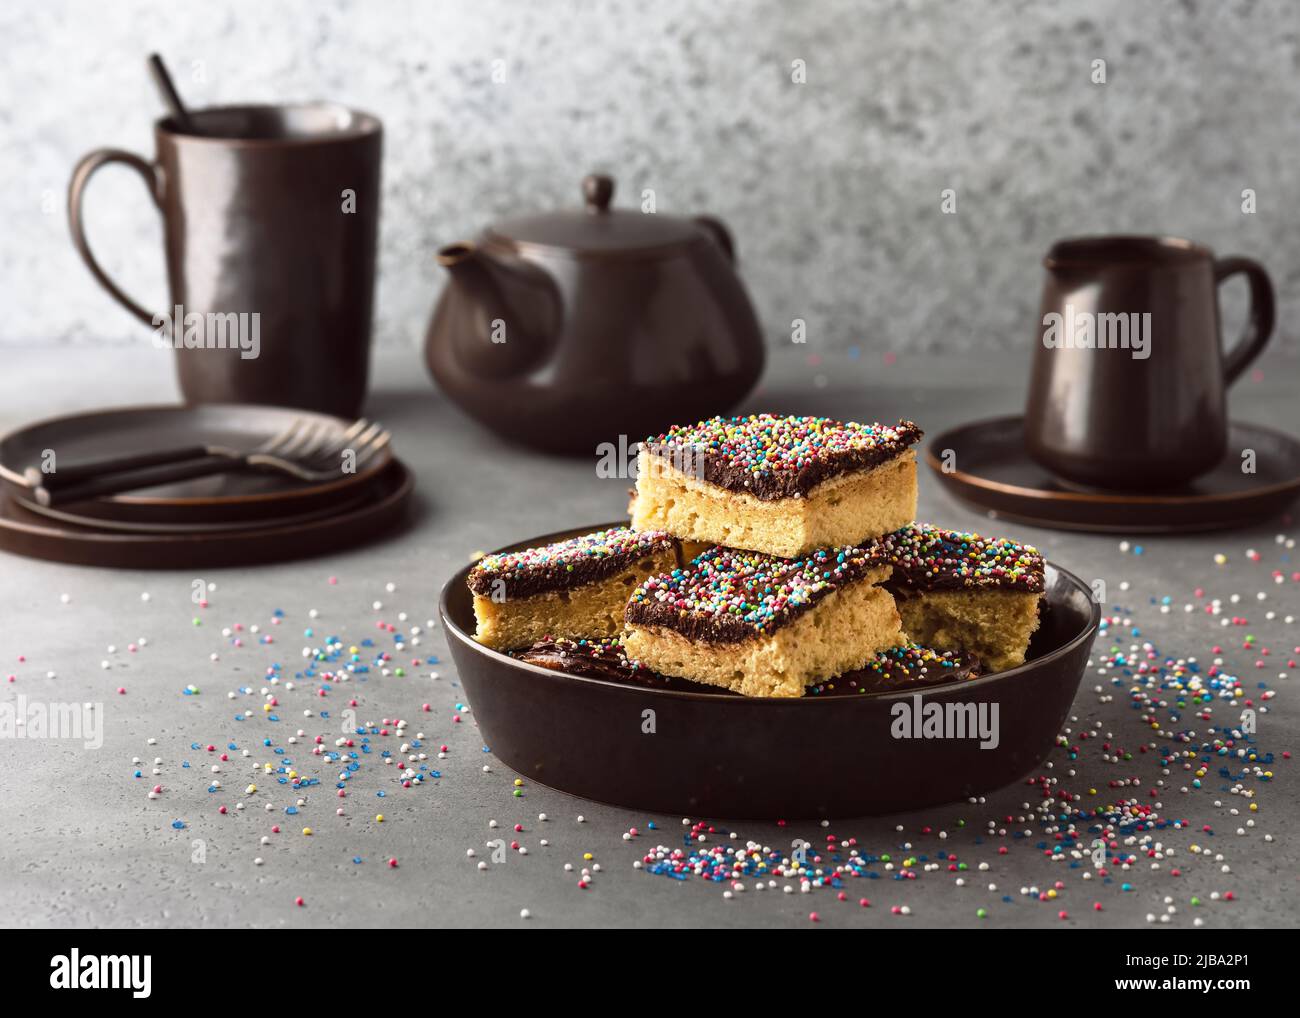 Delicious homemade cake with dark chocolate icing and colorful sugar sprinkle served on one plate. Rustic style. Selective focus. Copy space. Stock Photo